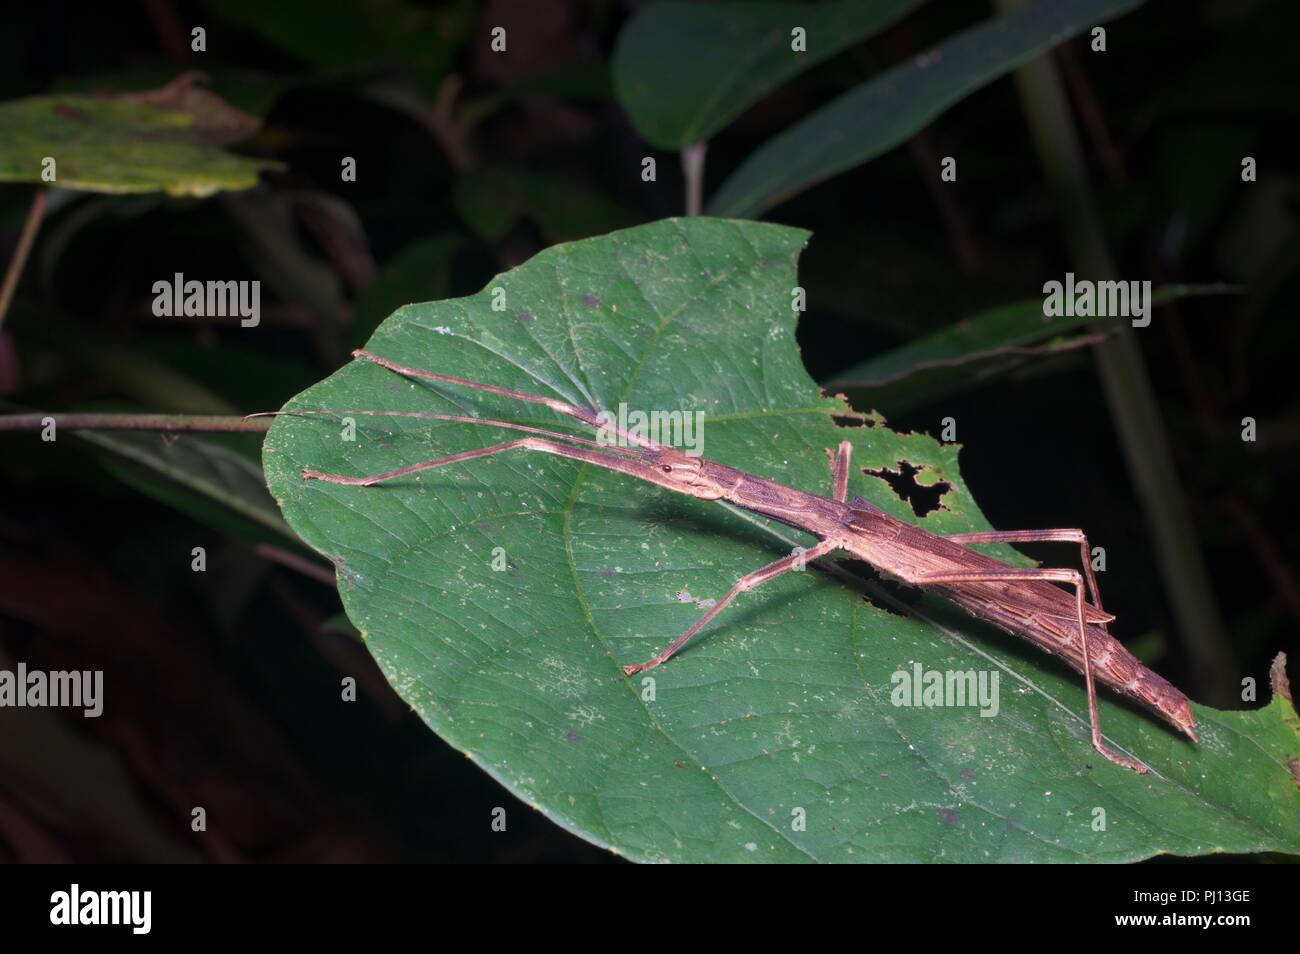 A stick insect (phasmid) on a rainforest leaf at night in Kubah National Park, Sarawak, East Malaysia, Borneo. Stock Photo